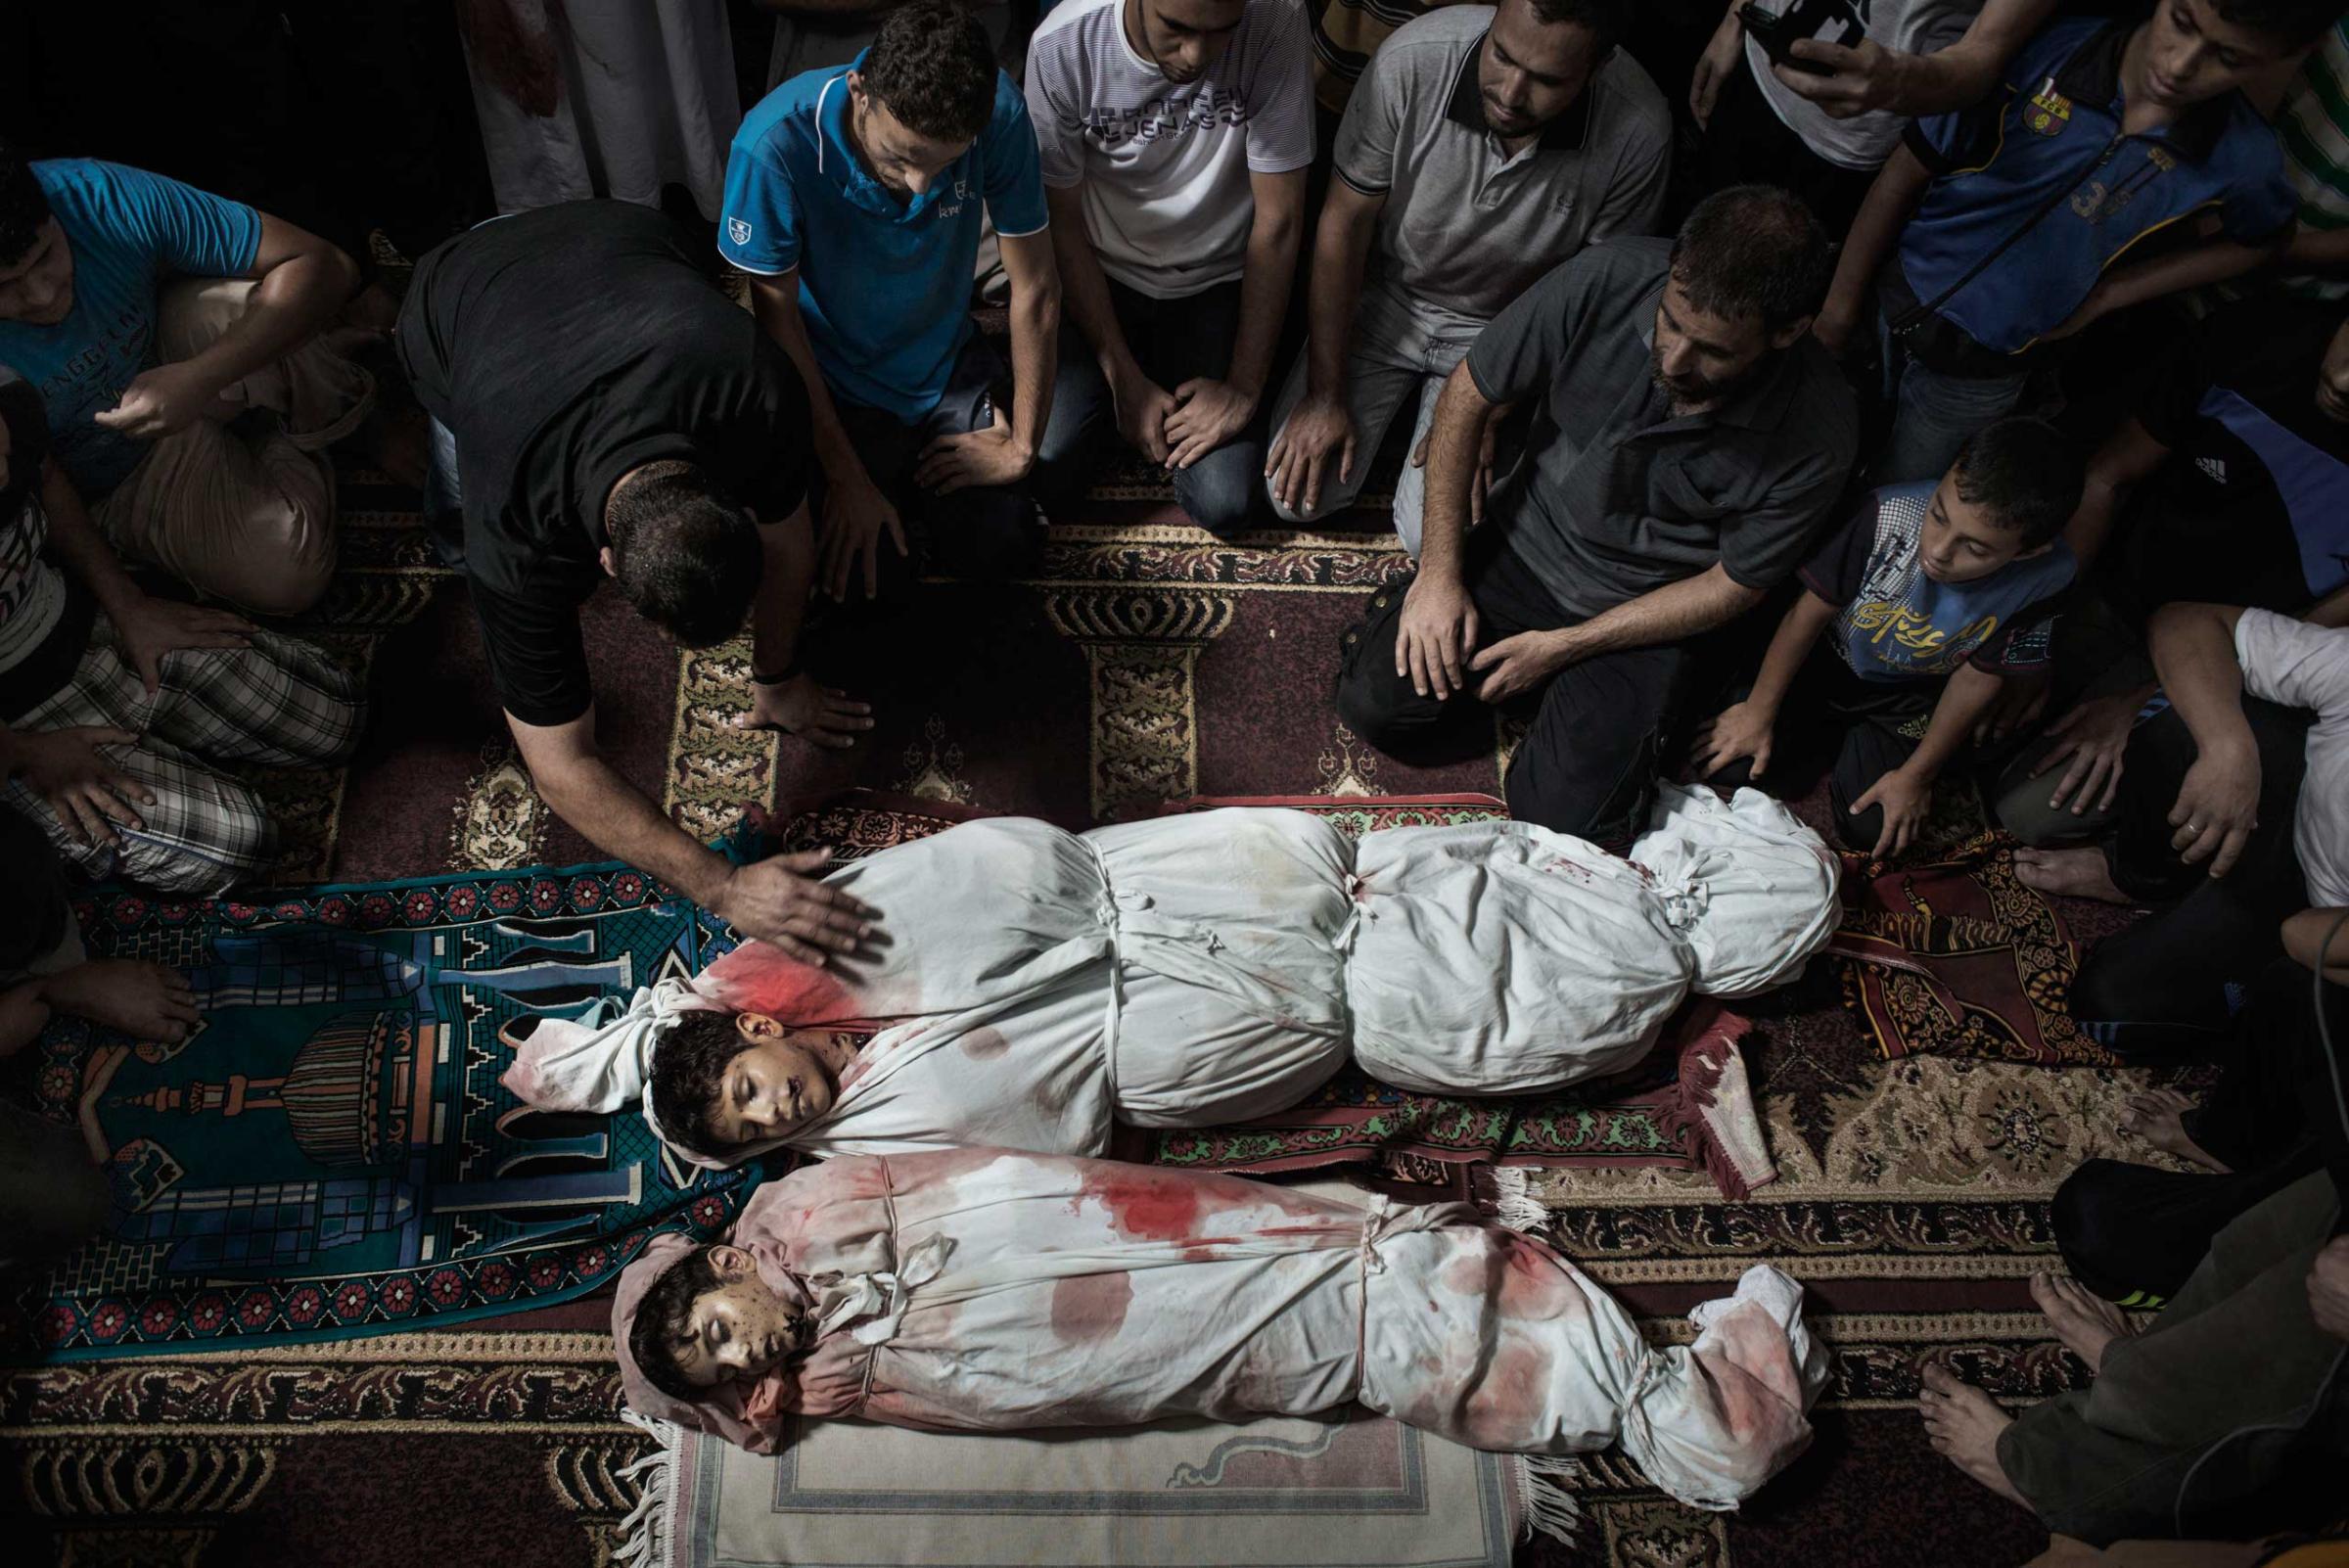 Relatives pray over the bodies of two brothers, named Amir and Mohammed, in a mosque in Gaza City, July 9, 2014.